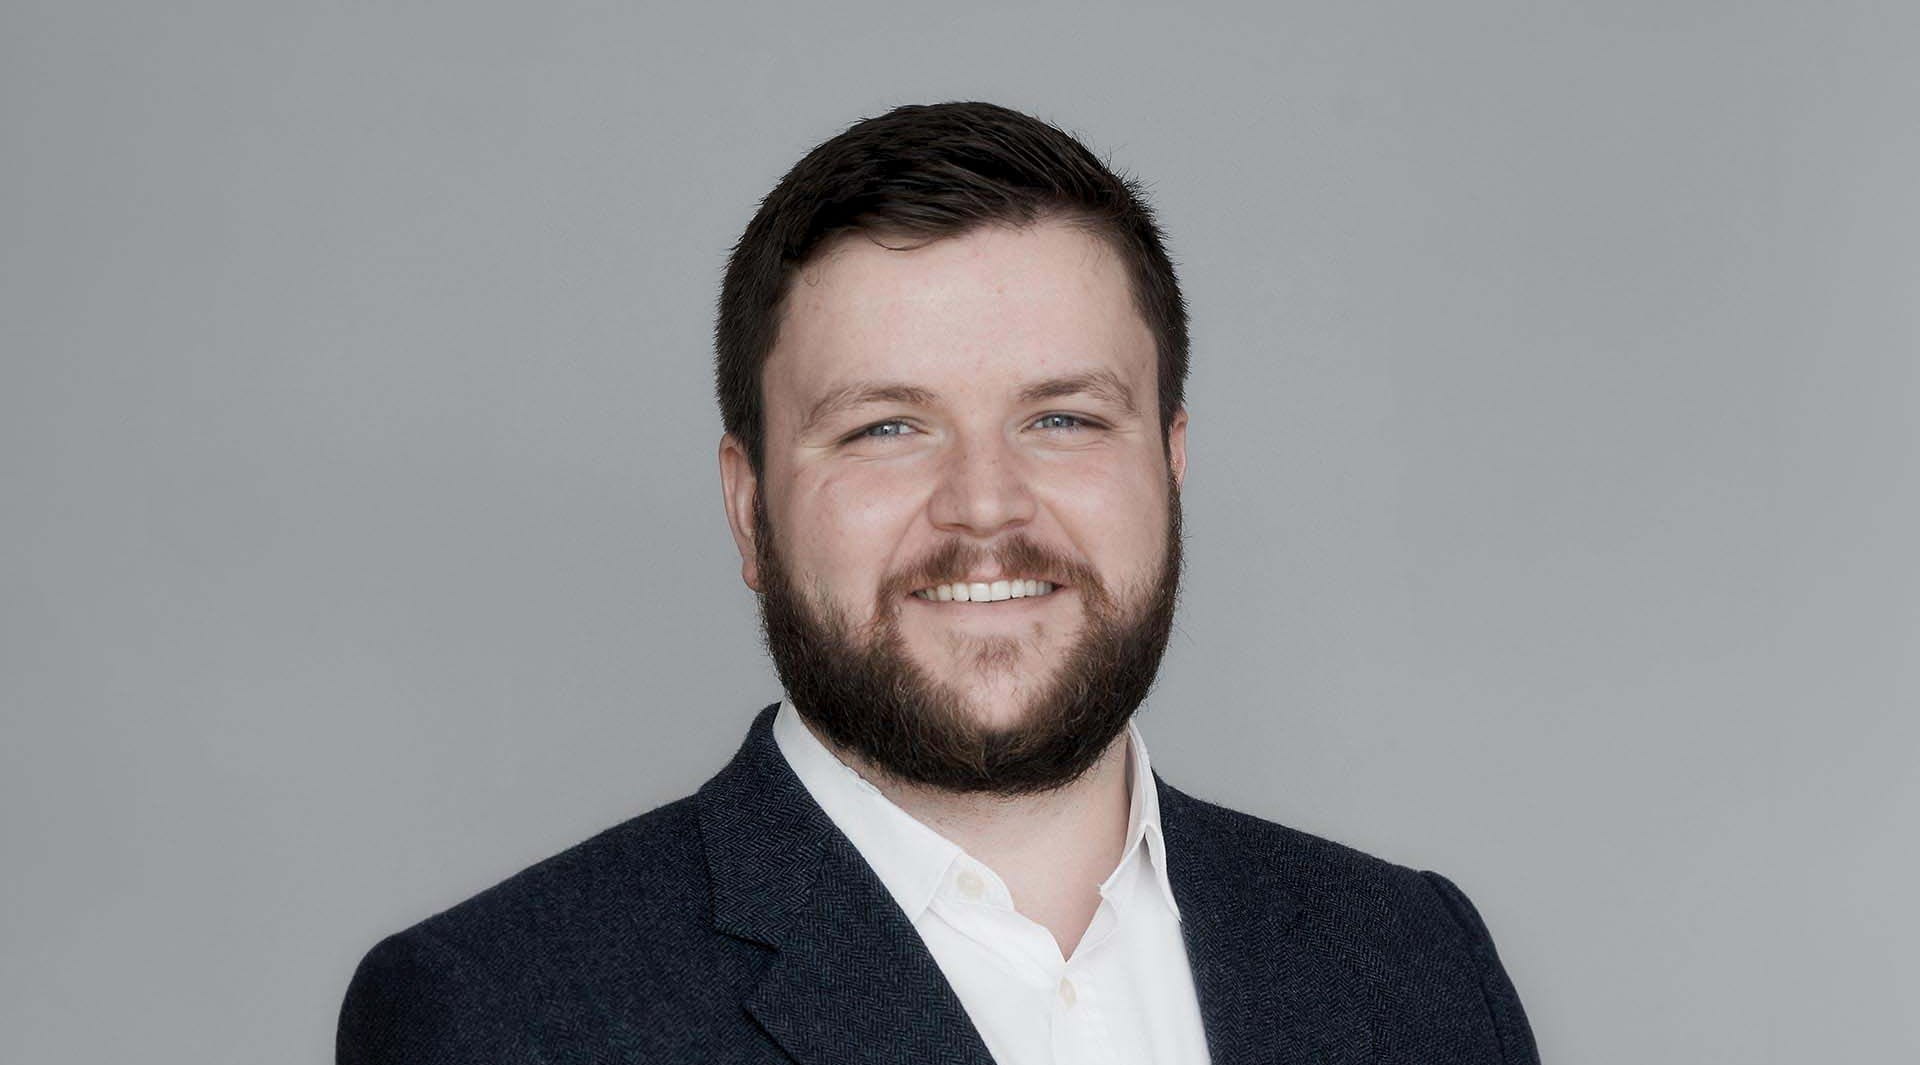 Henry Whorwood is head of research and consultancy at Beauhurst, the data and analytics company with a focus on high growth companies and a member of the Corporate Finance Faculty